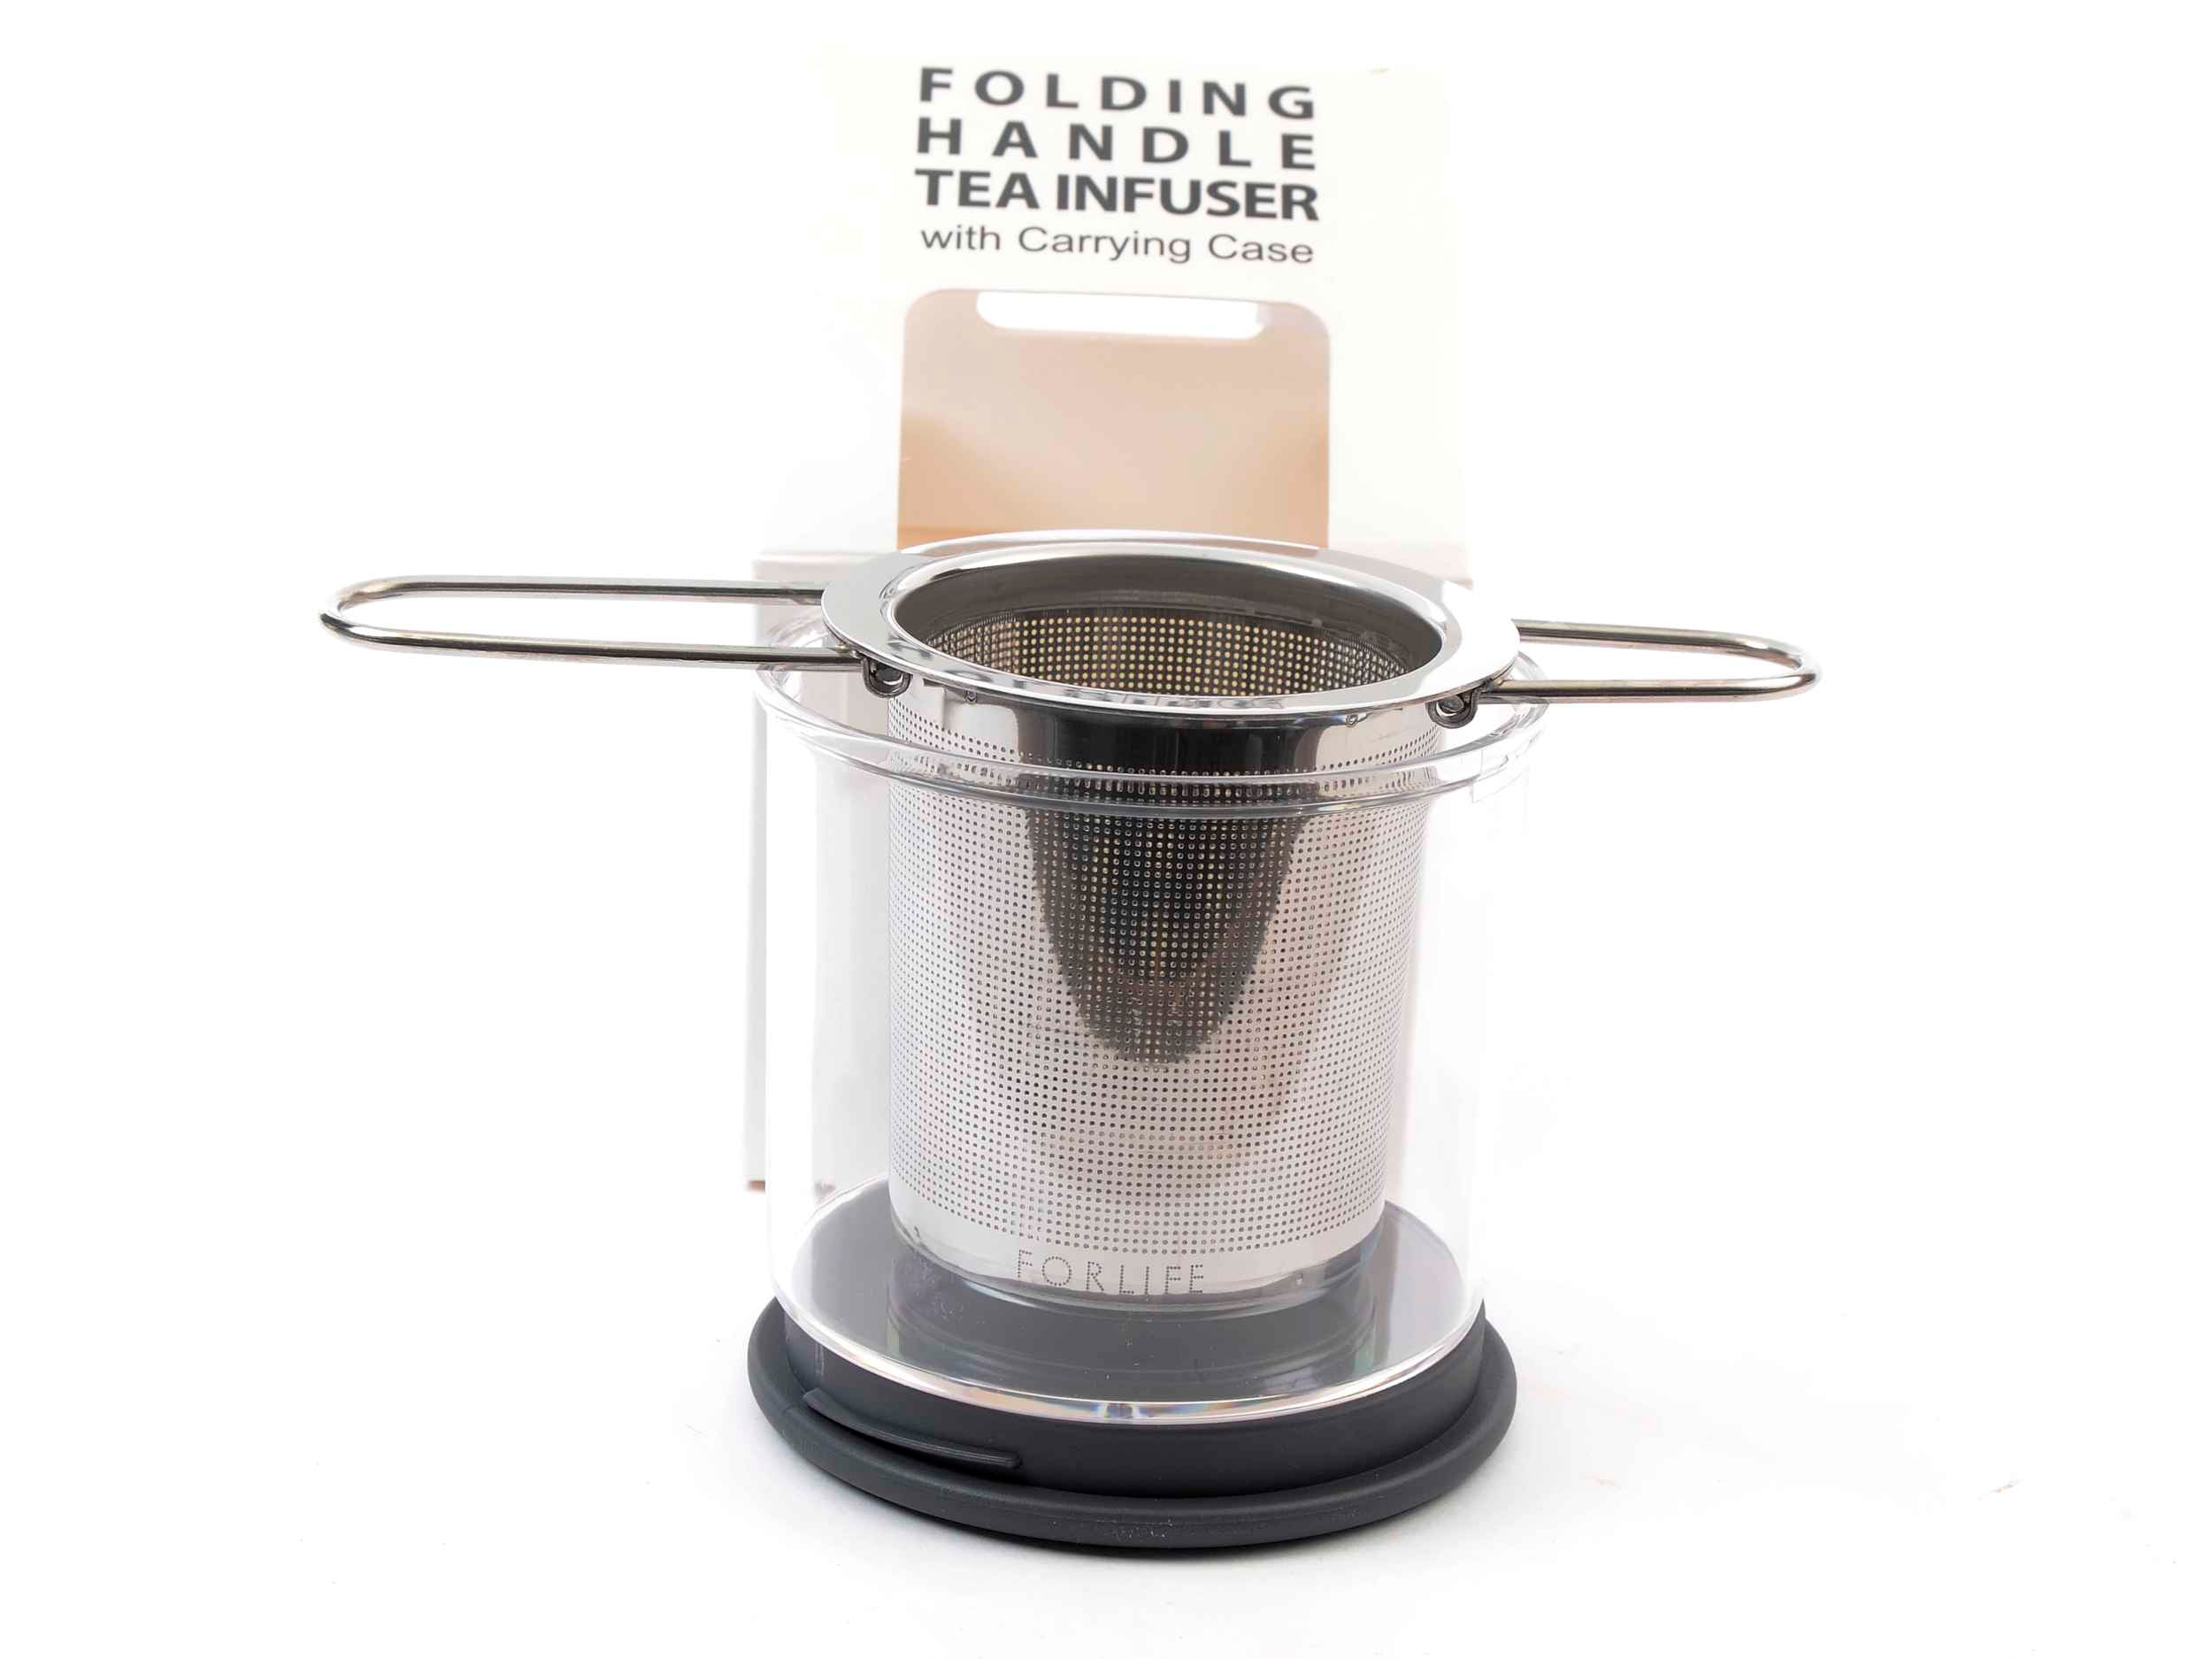 FORLIFE Folding Handle Tea Infuser with Carrying Case